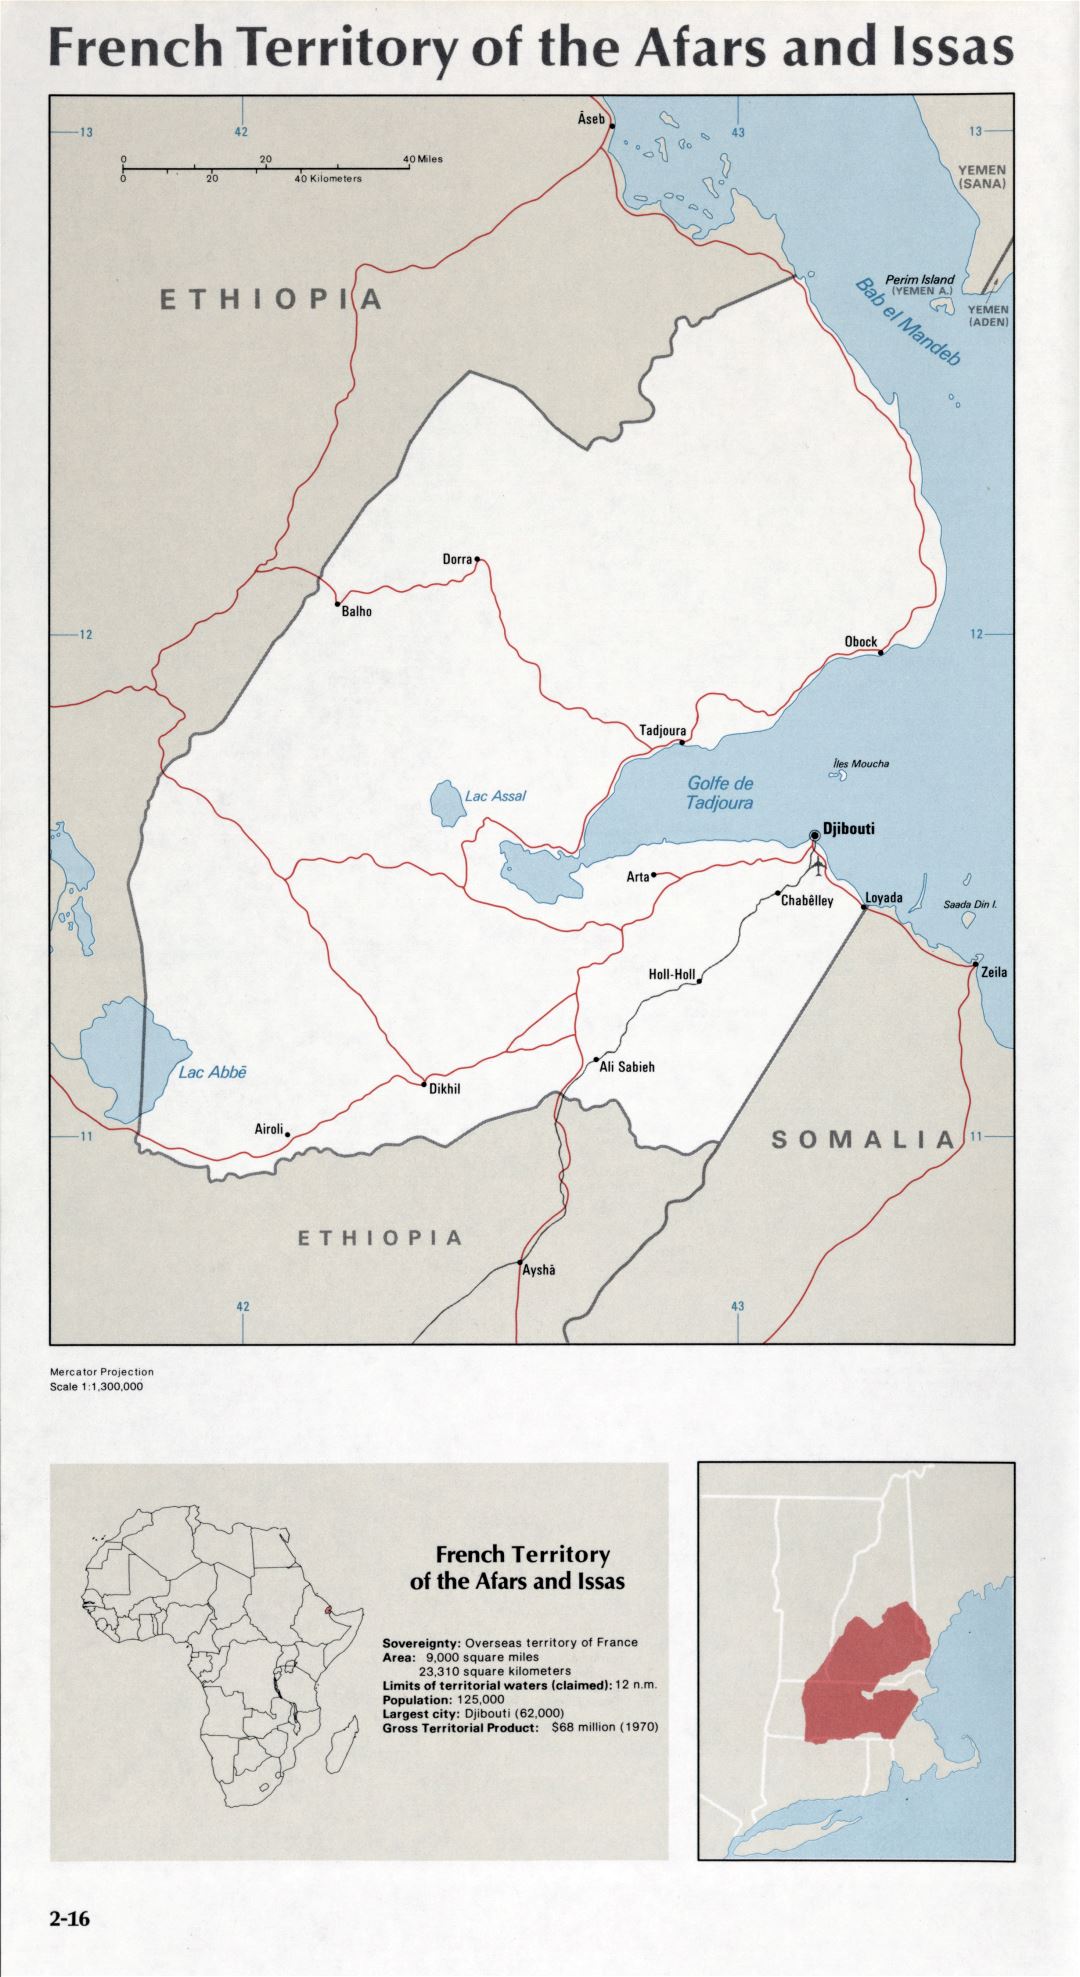 Map of French Territory of the Afars and Lssas (2-16)